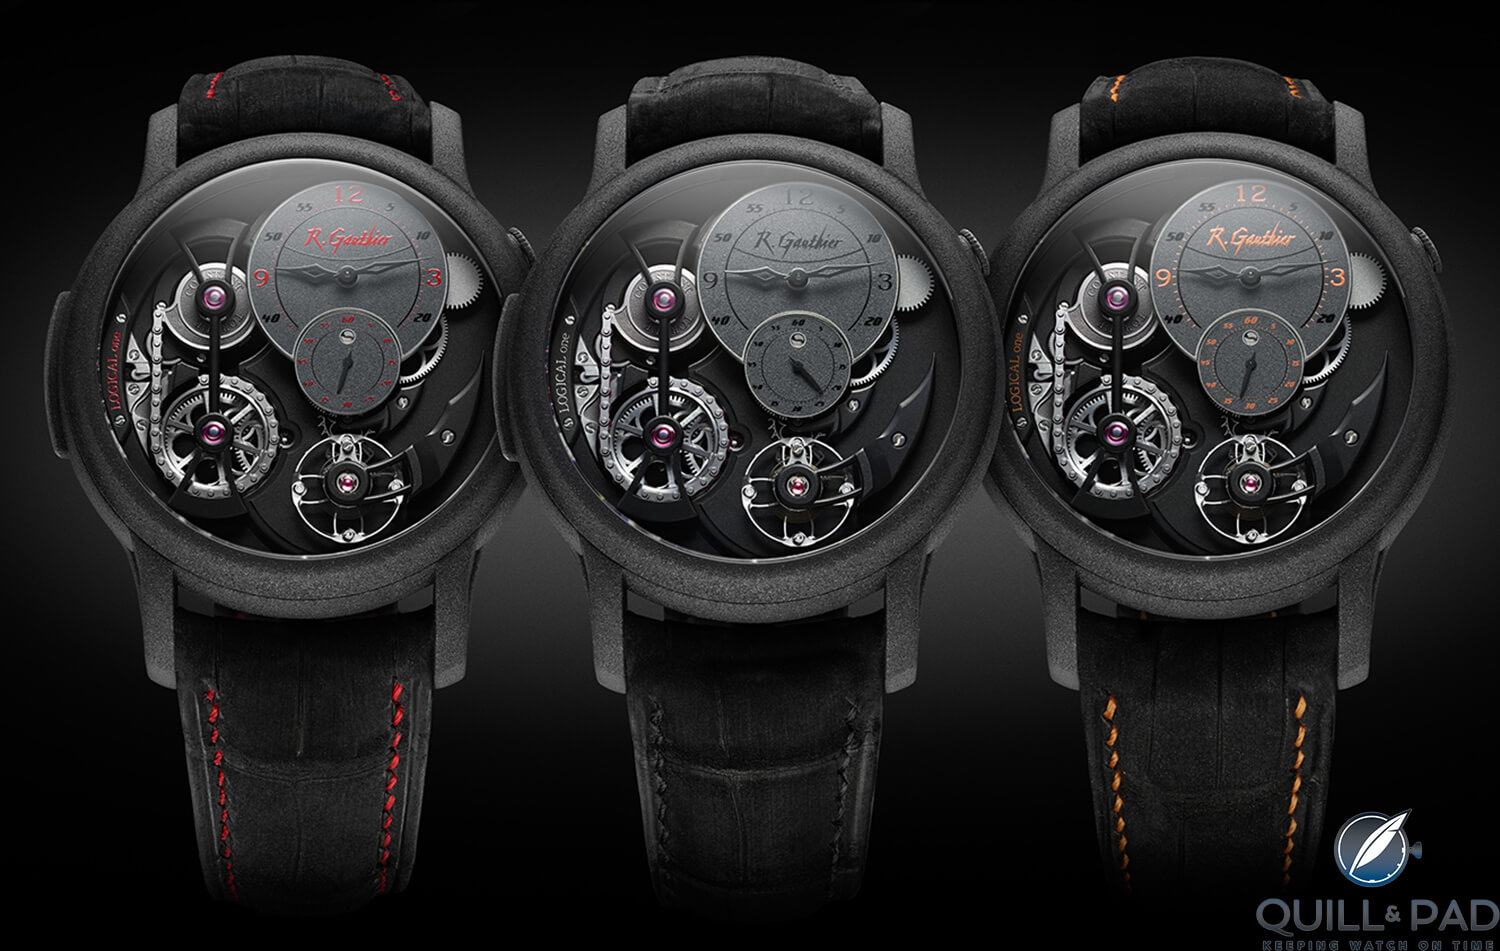 Romain Gauthier's Logical One Engraged with red, black and orange accents